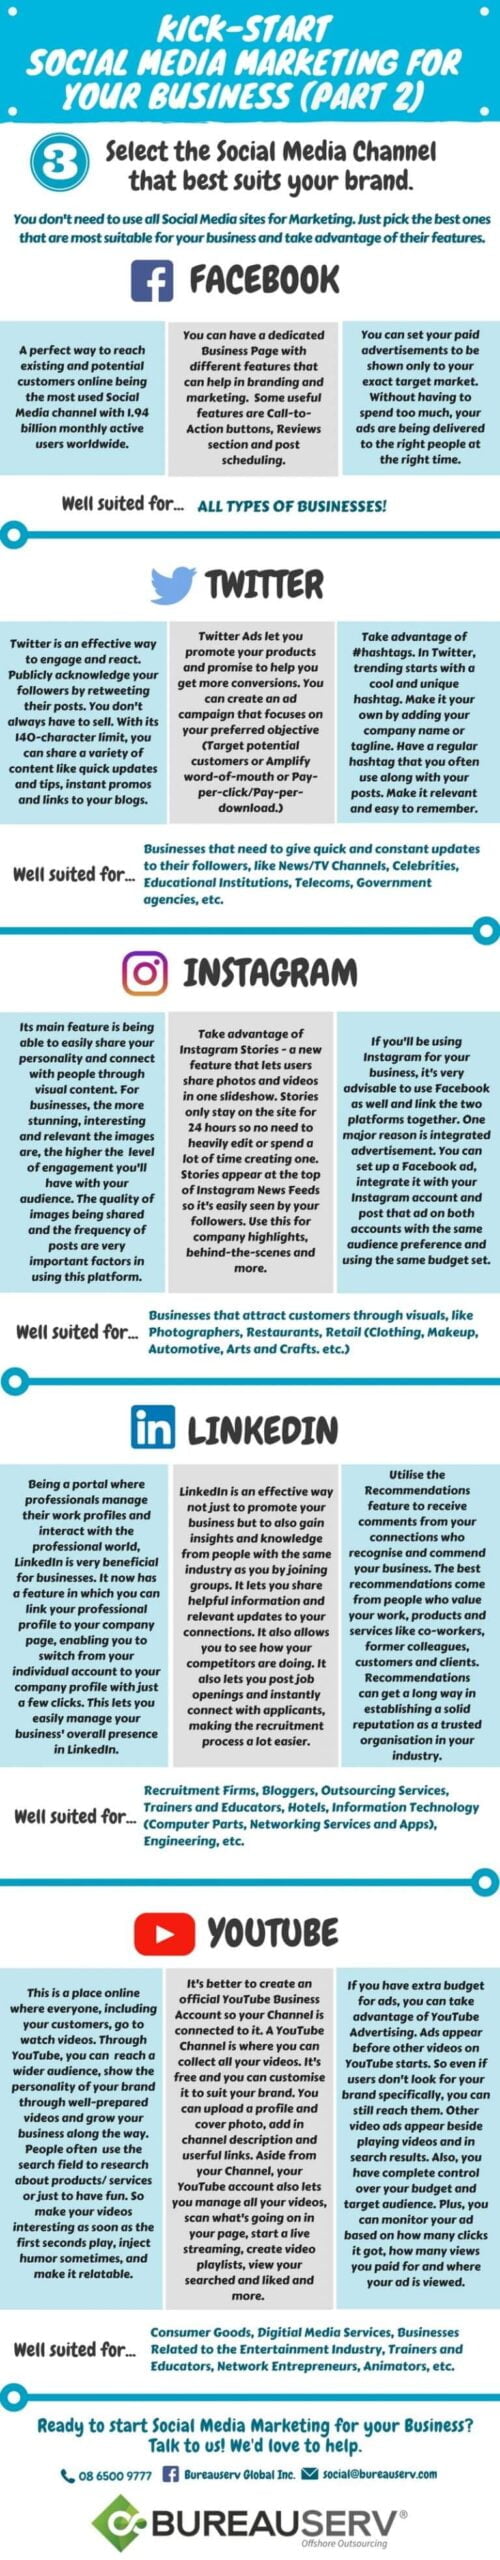 social media marketing guide for your business infographic